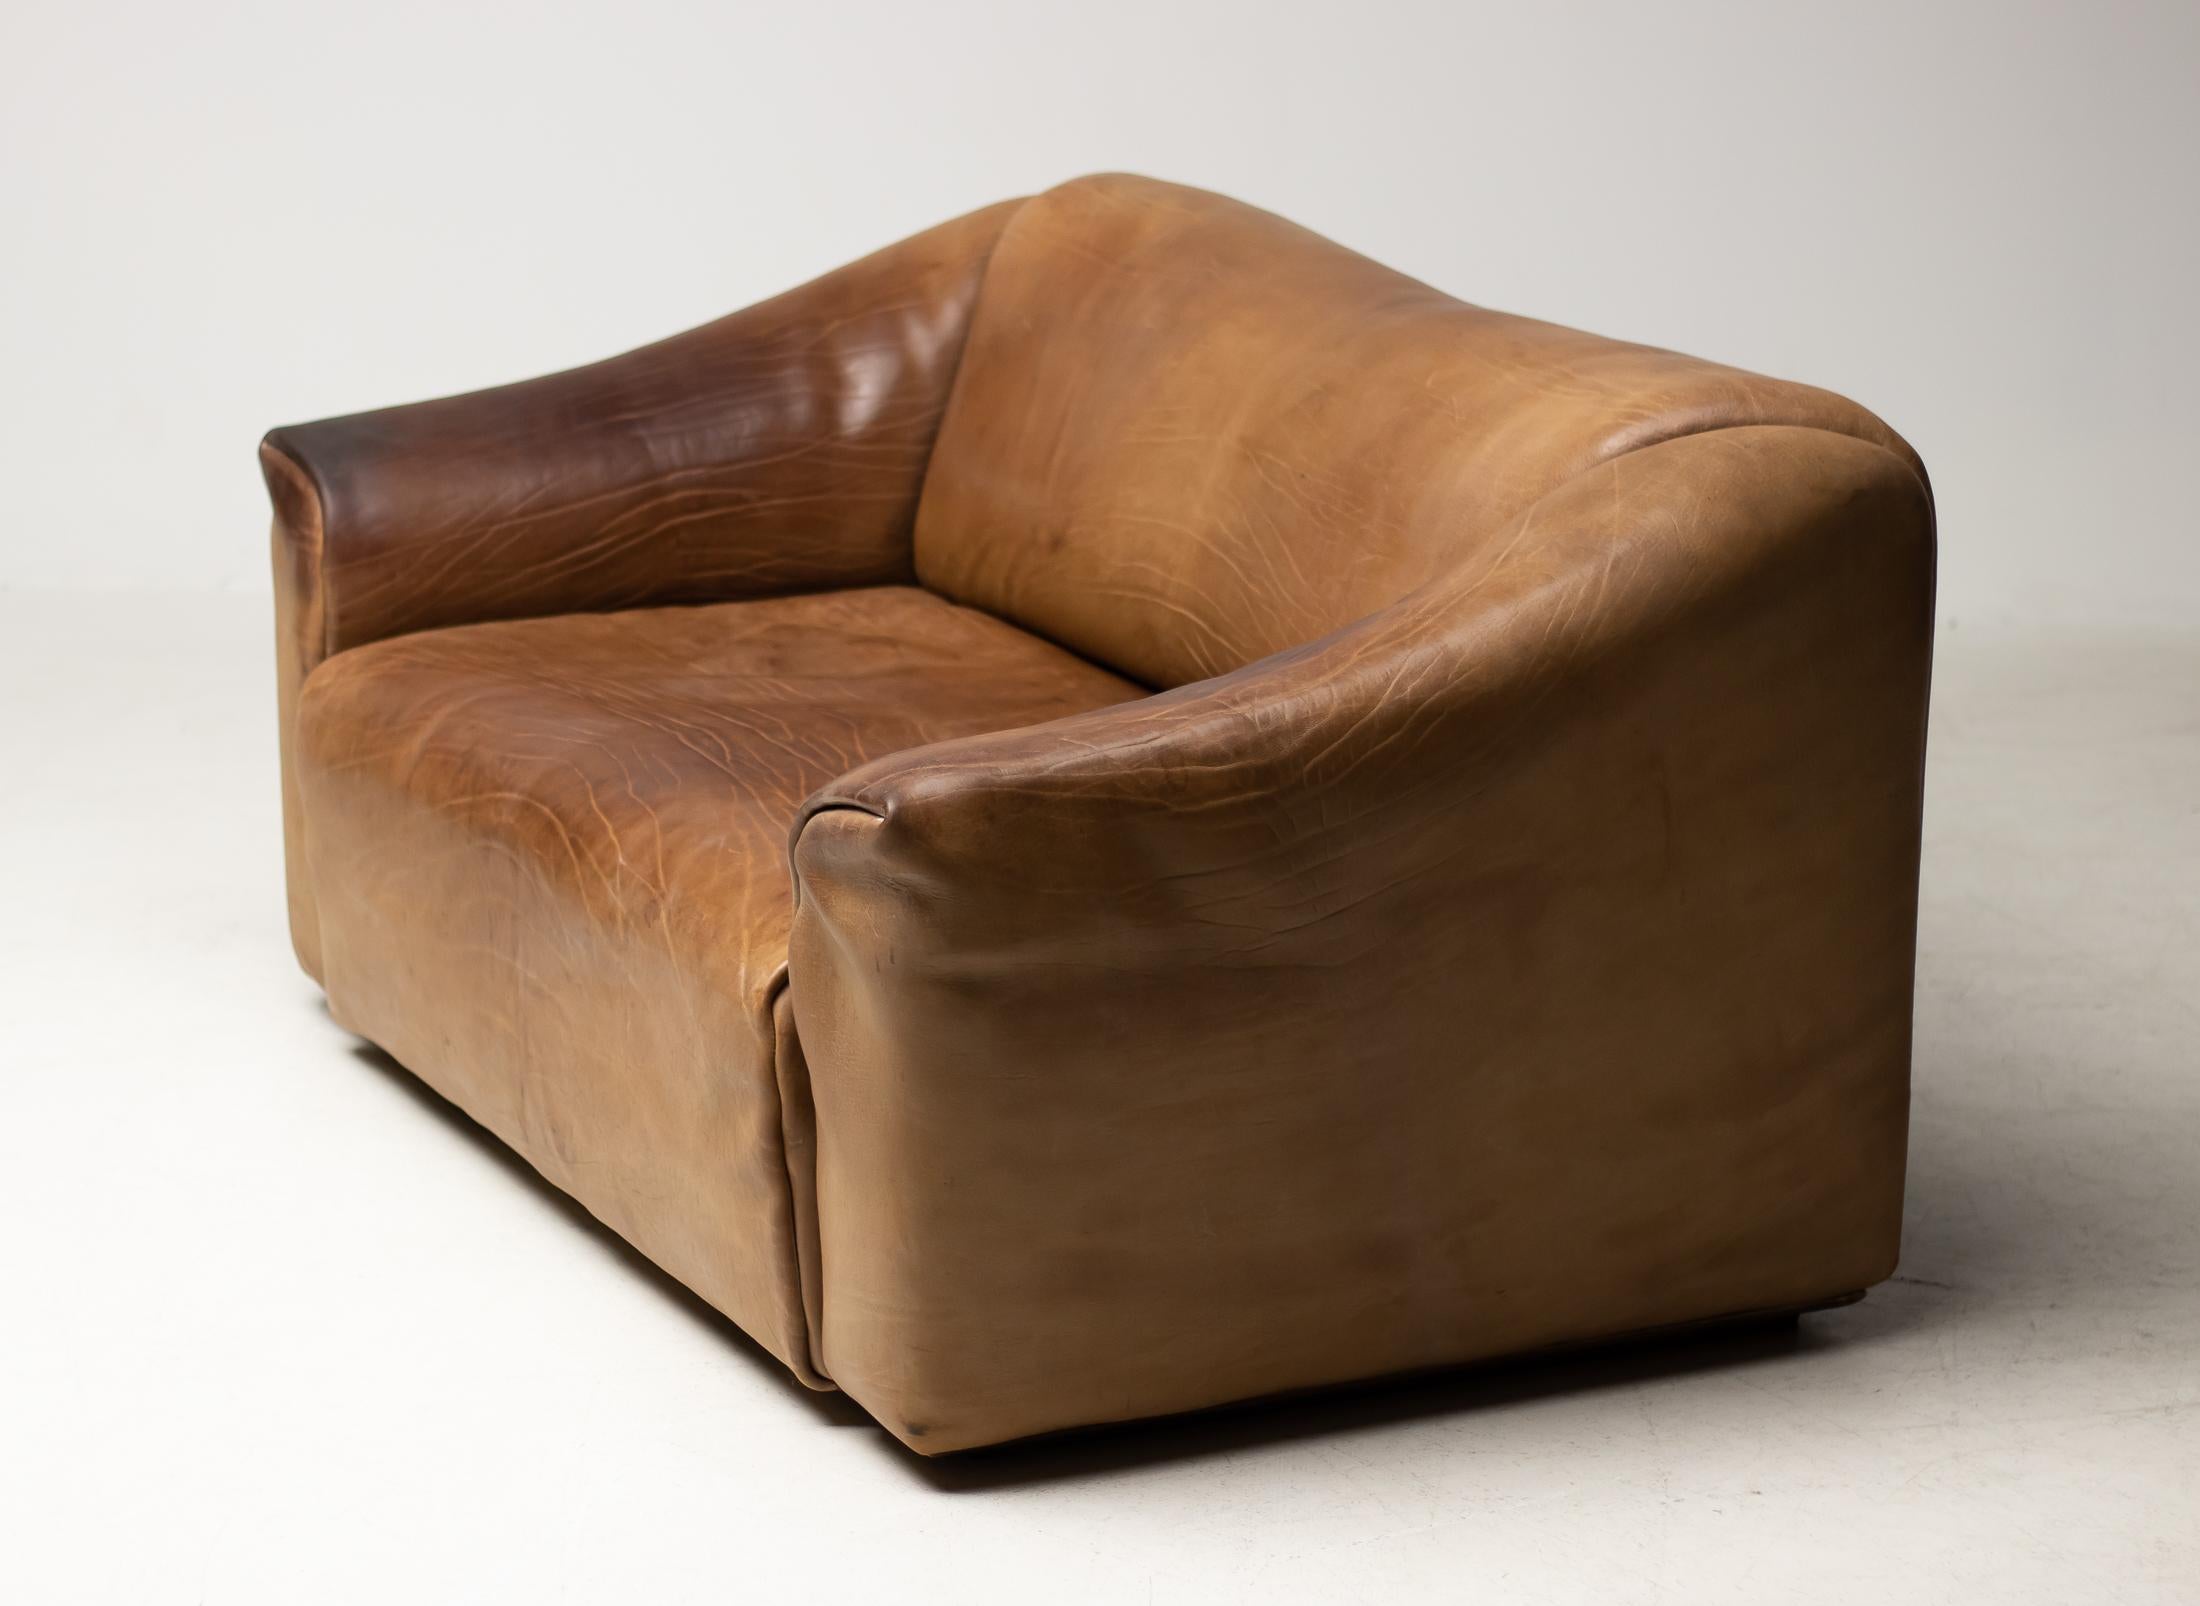 Very comfortable De Sede DS-47 sofa in buffalo leather, Switzerland, 1970s. 
The design is basic, yet very modern. The seat is extendable for more comfort. The thick leather is laid in one piece, from the outside working inwards. The high quality